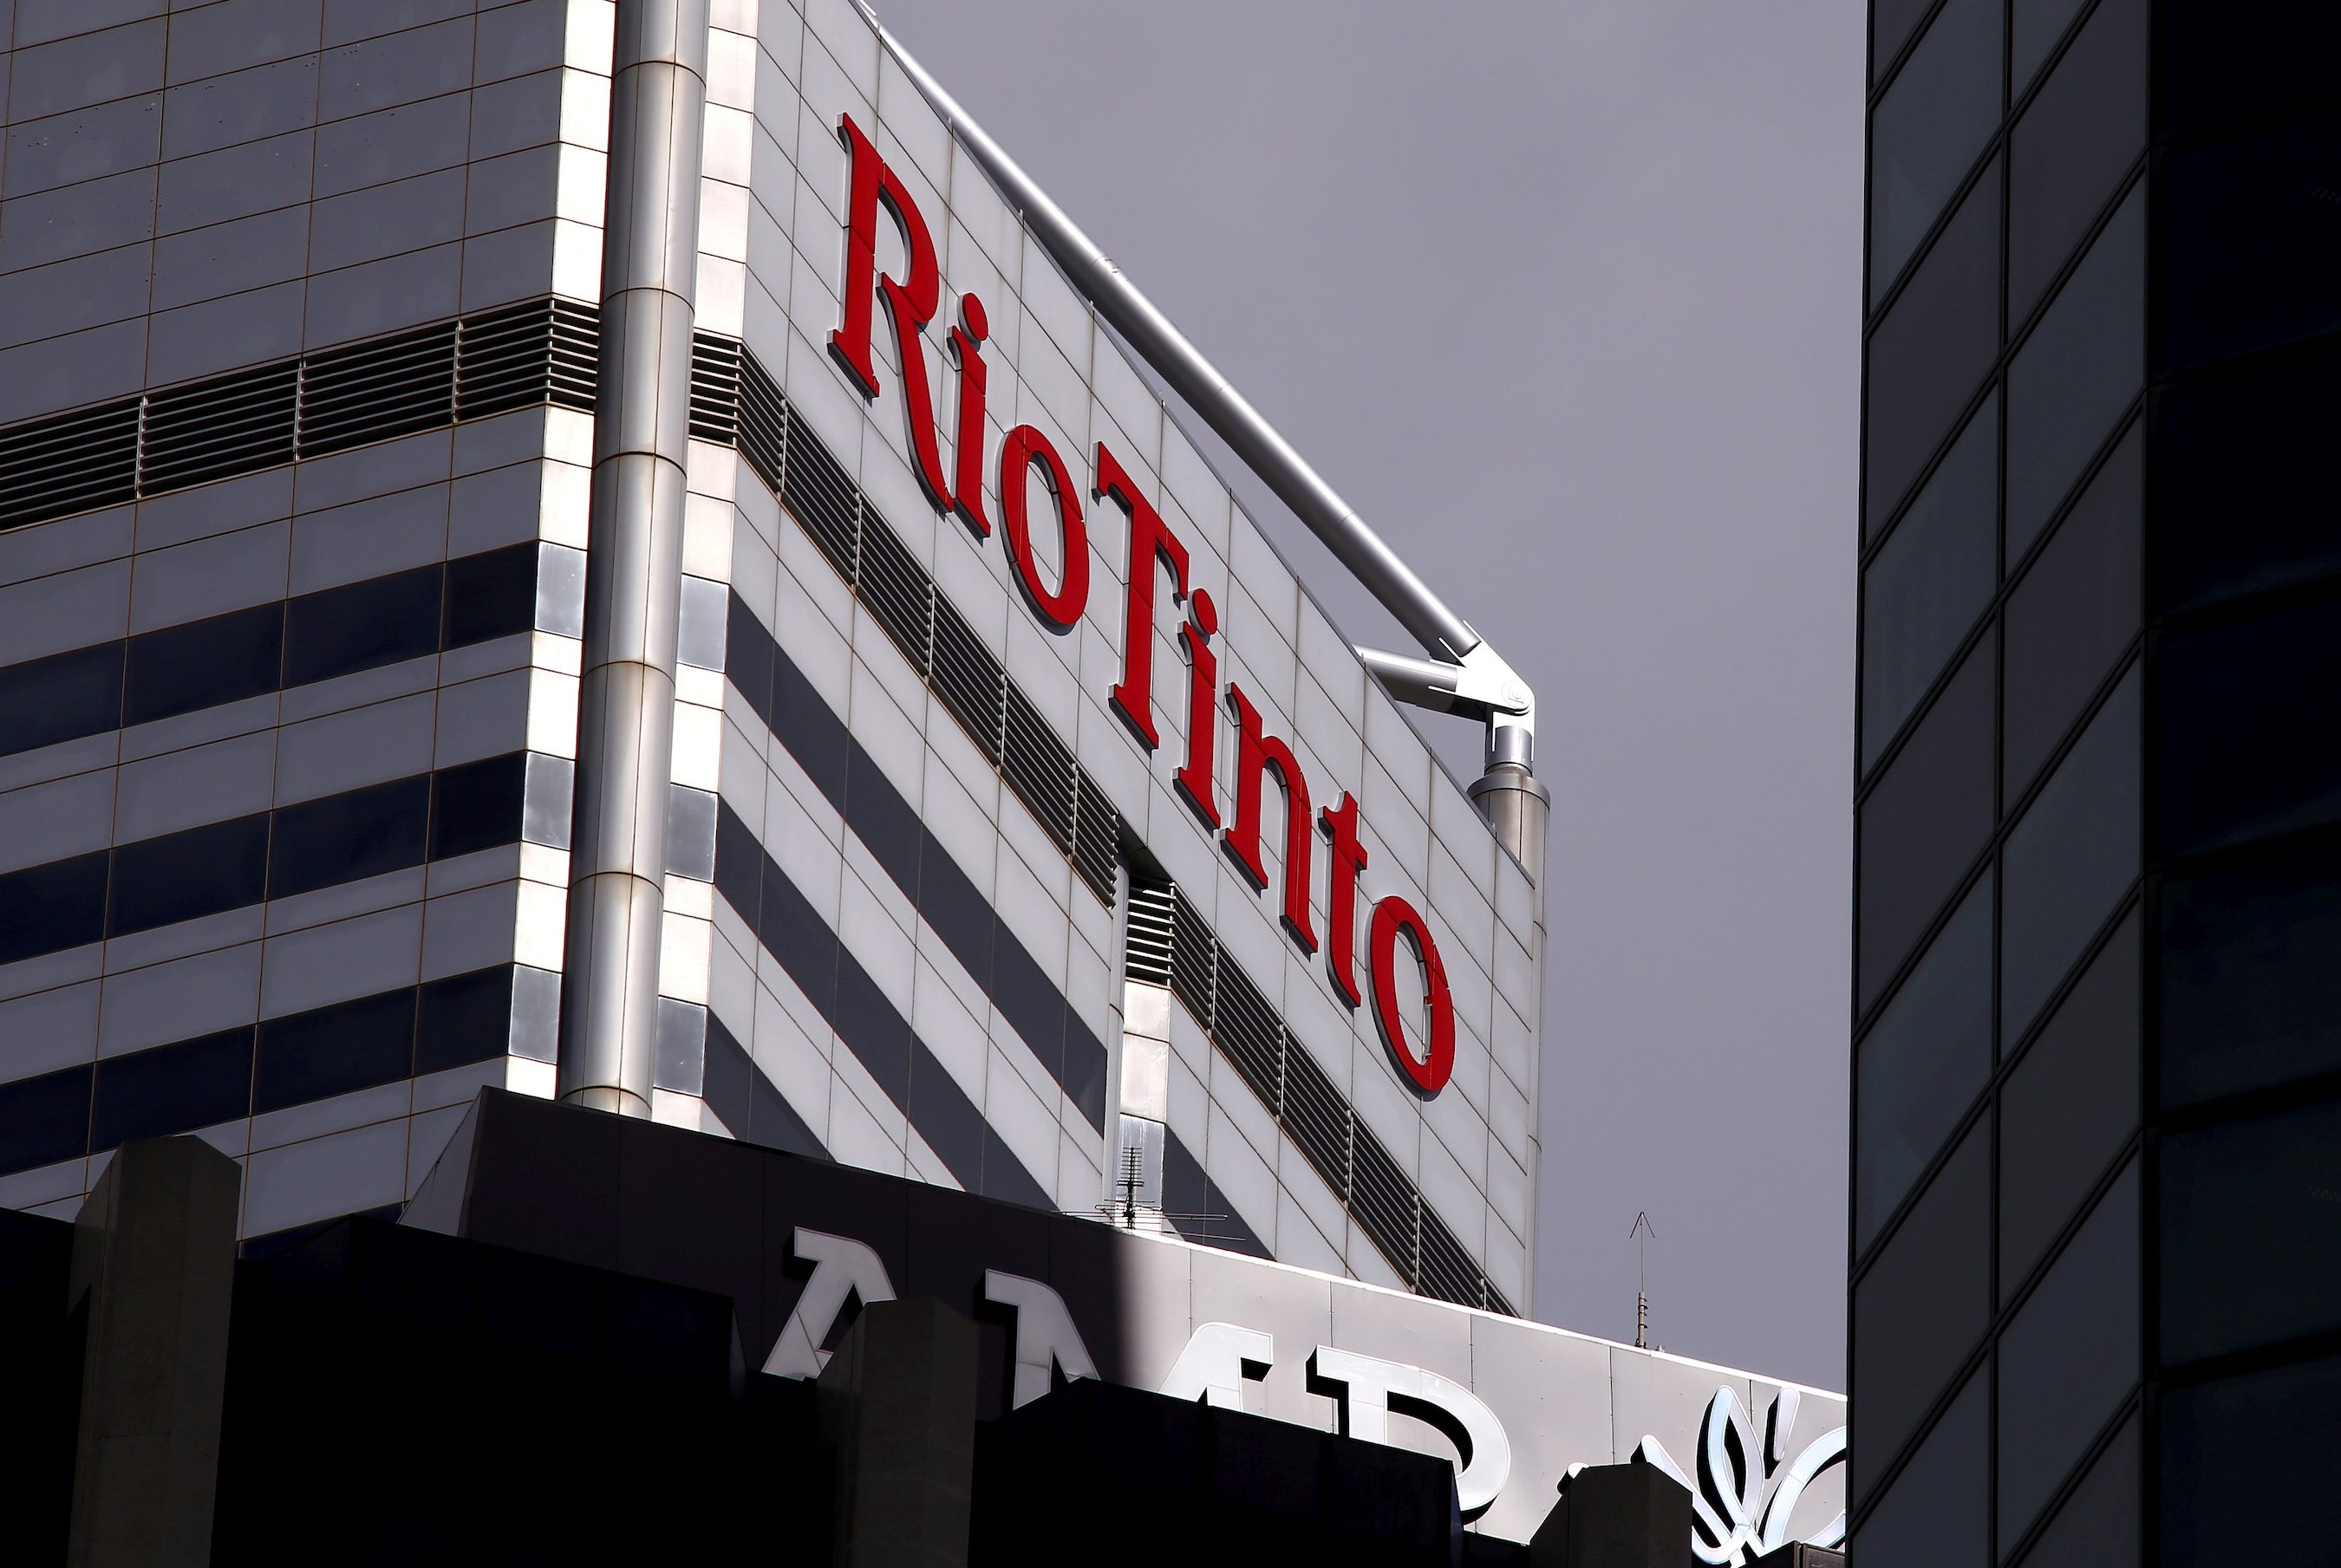 Russia’s Rusal files suit against Rio Tinto over alumina refinery